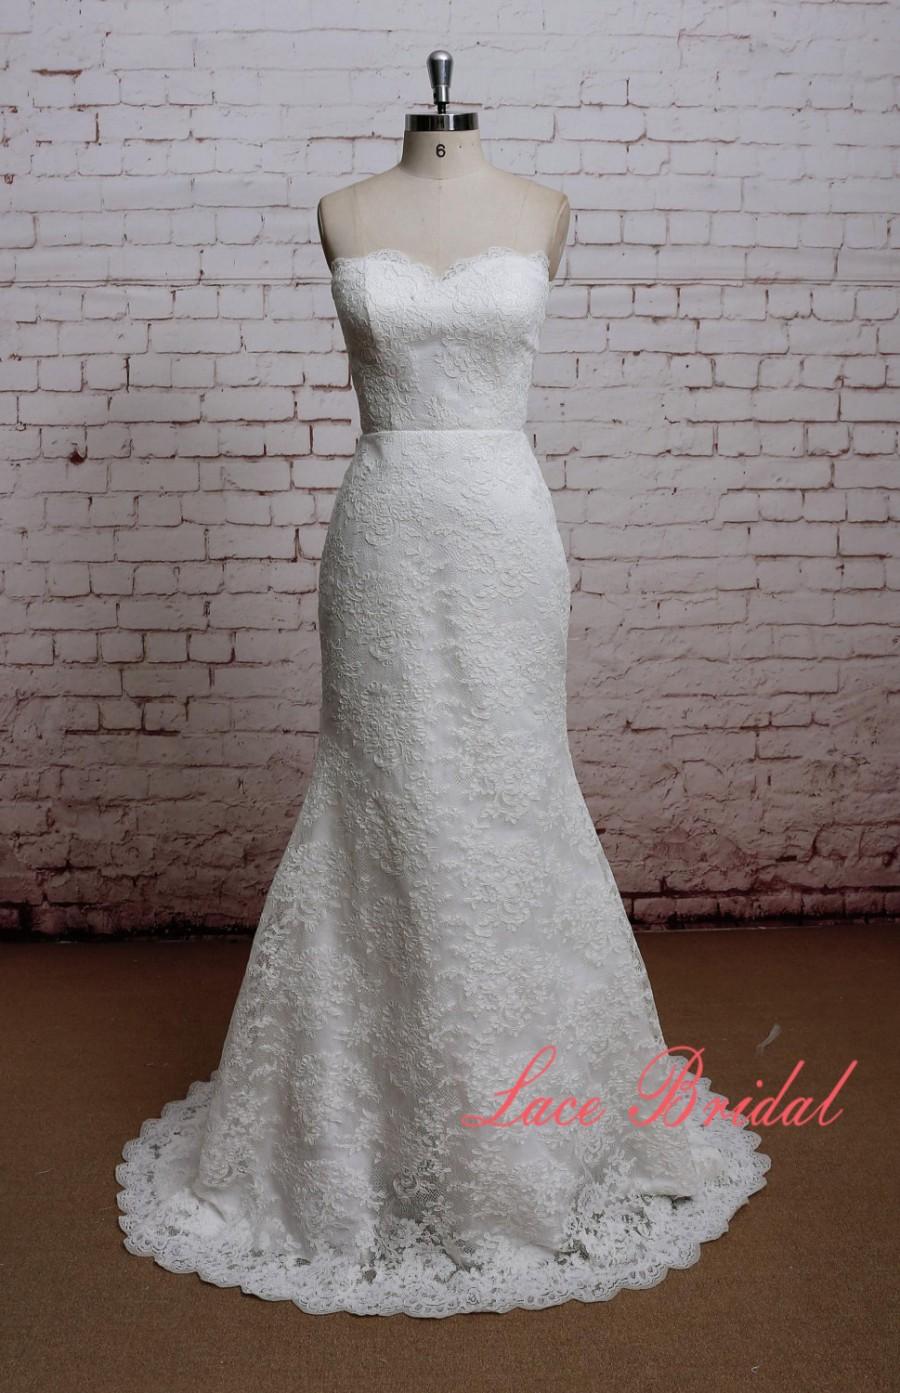 Wedding - New Style Wedding Dress Mermaid Style Bridal Gown Classic Lace Wedding Gown Full Lace Skirt Dress